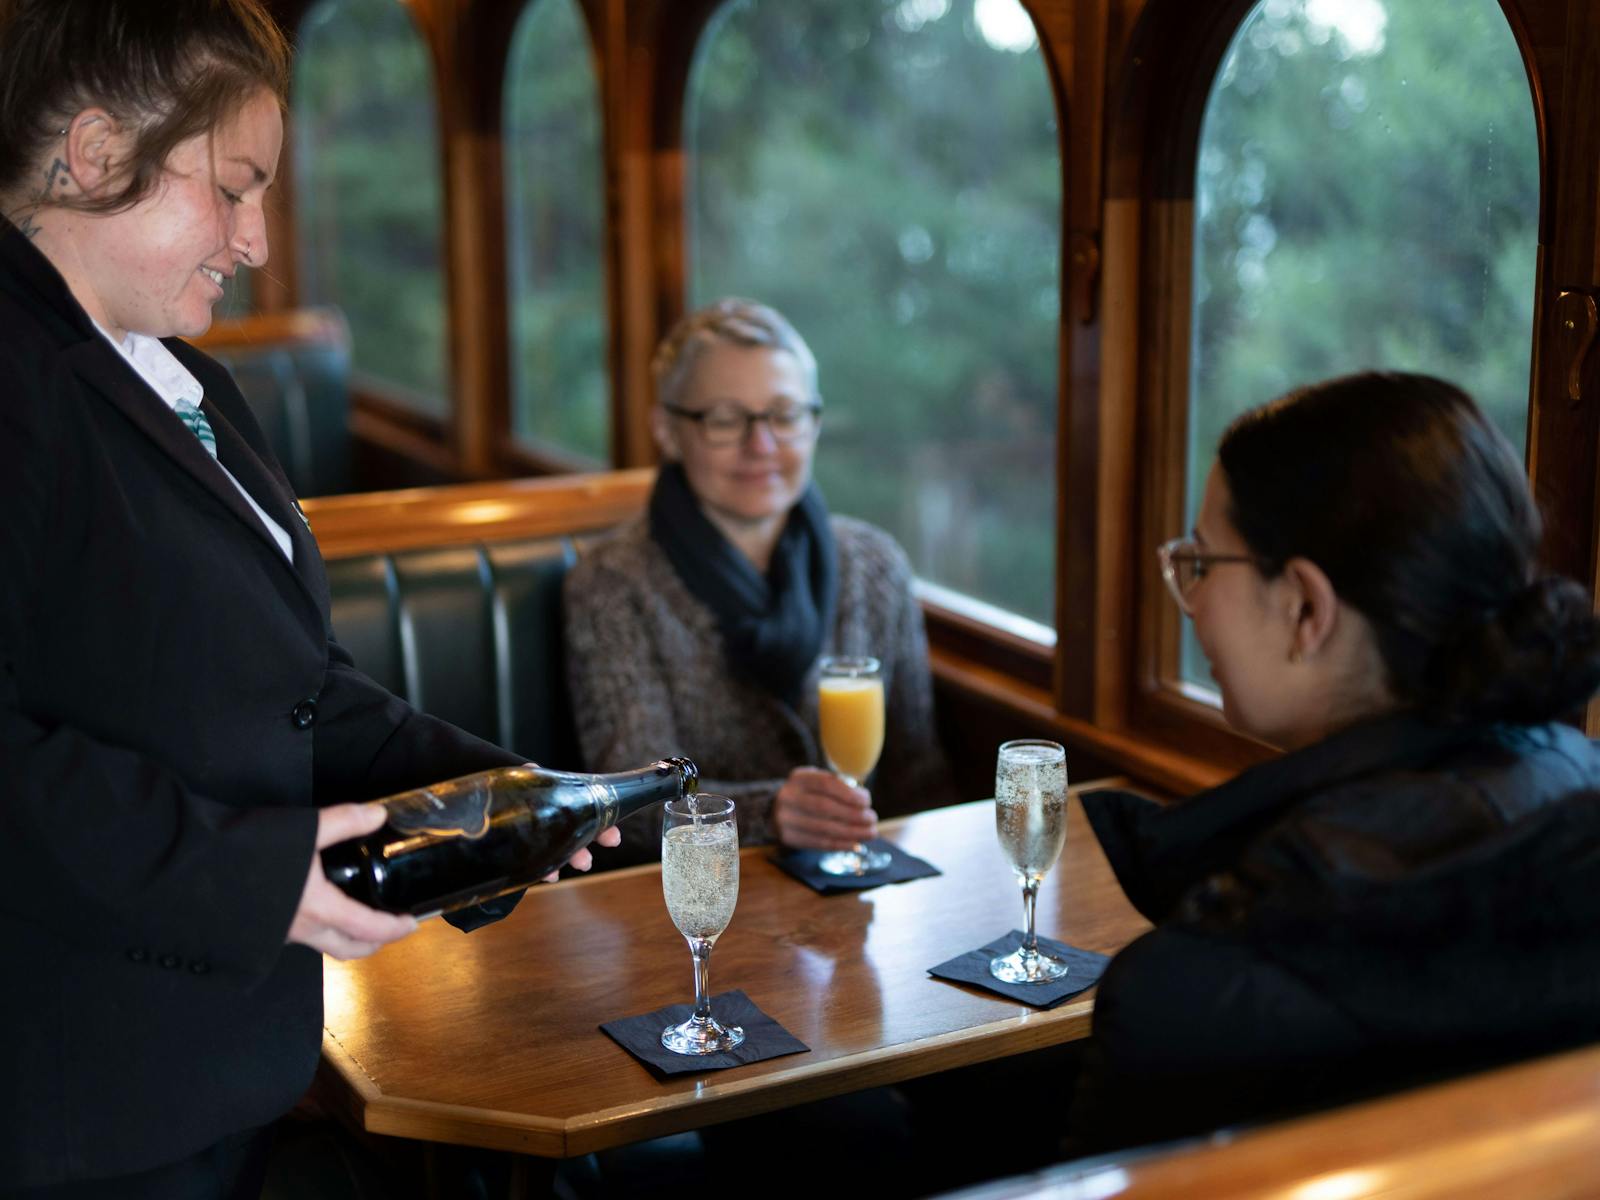 Steward pours sparkling wine for passengers onboard the wilderness carriage